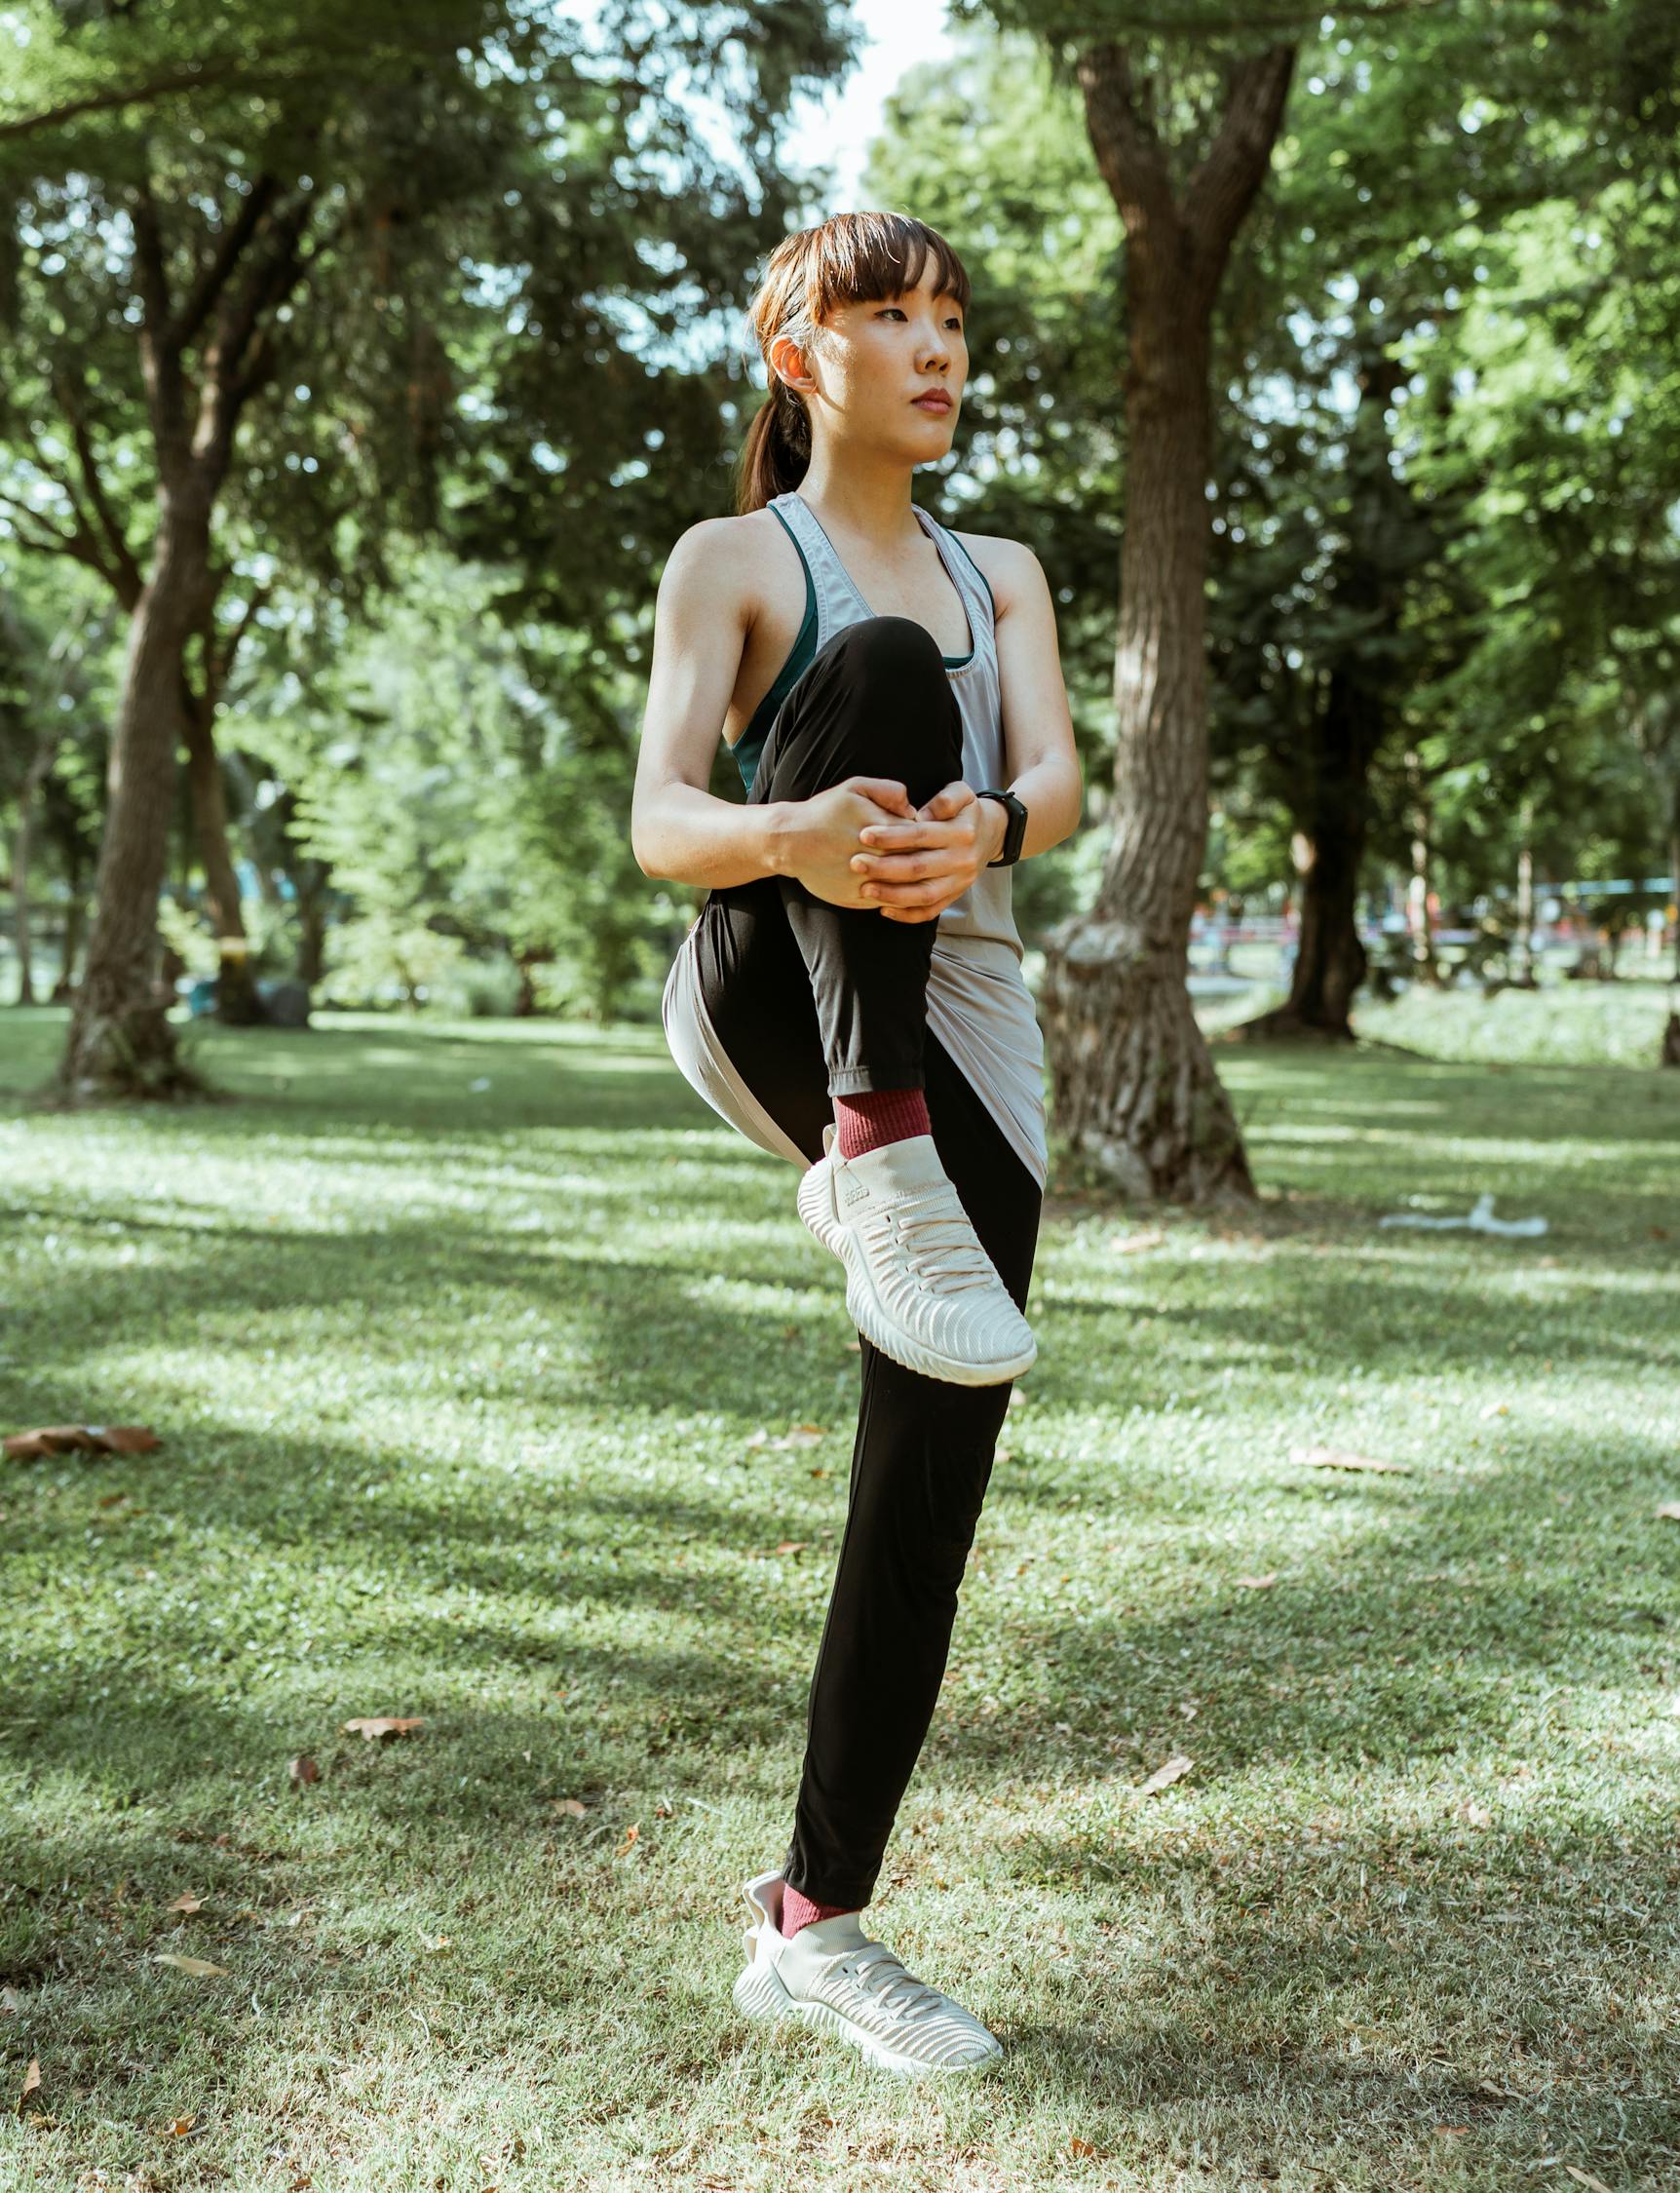 Sporty Asian woman stretching muscles in park · Free Stock Photo